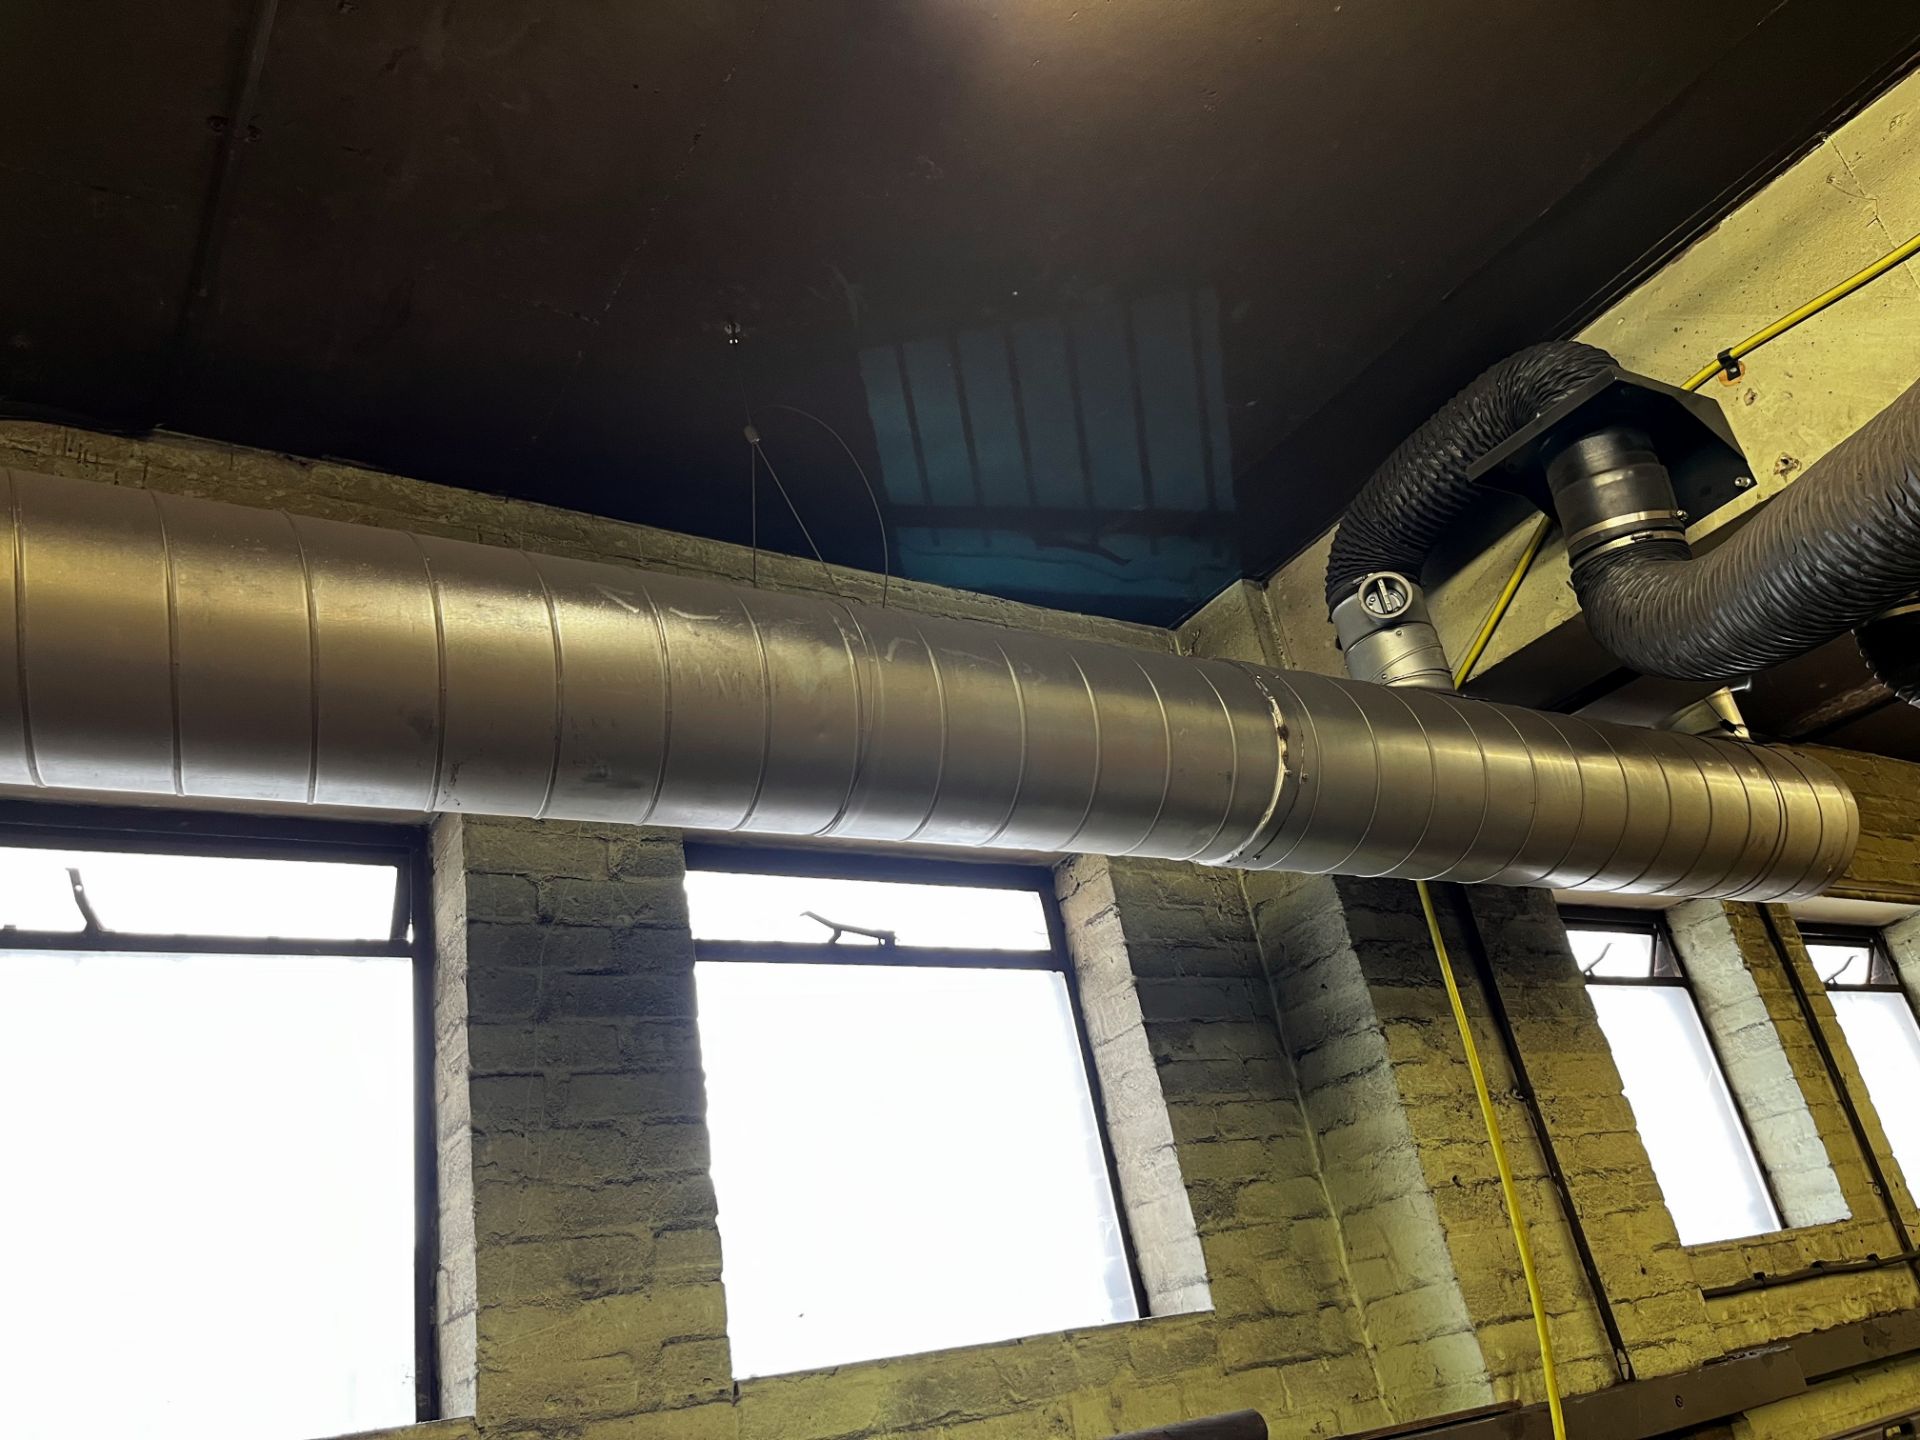 Fume Extraction System throughout Workshop, Comprising Extraction Hoses, Ducting & Exterior